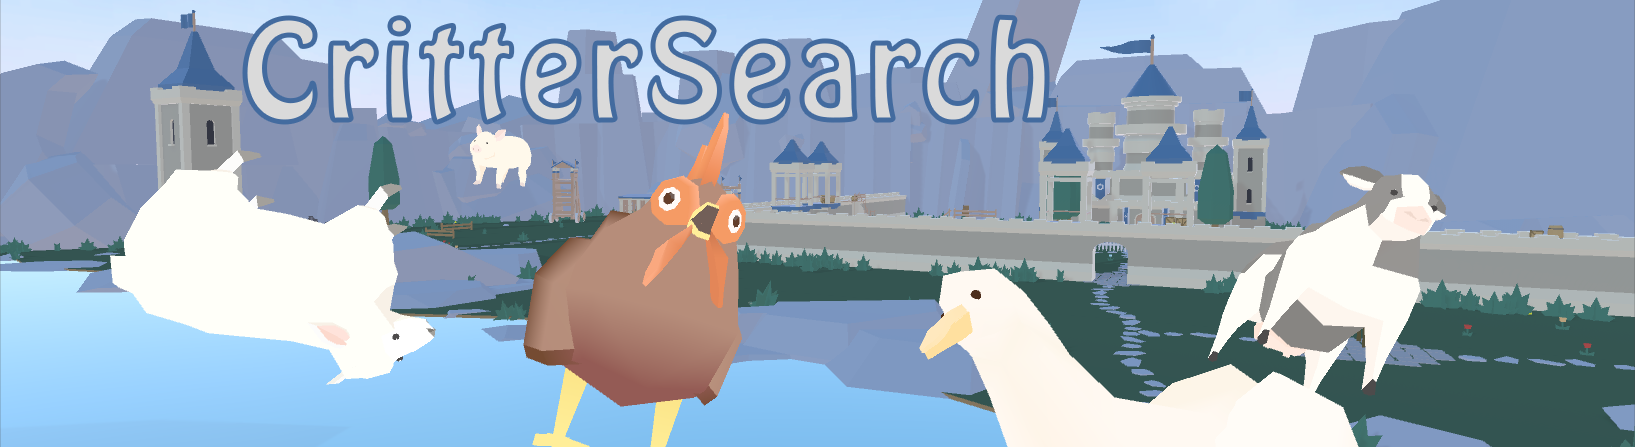 Critter Search